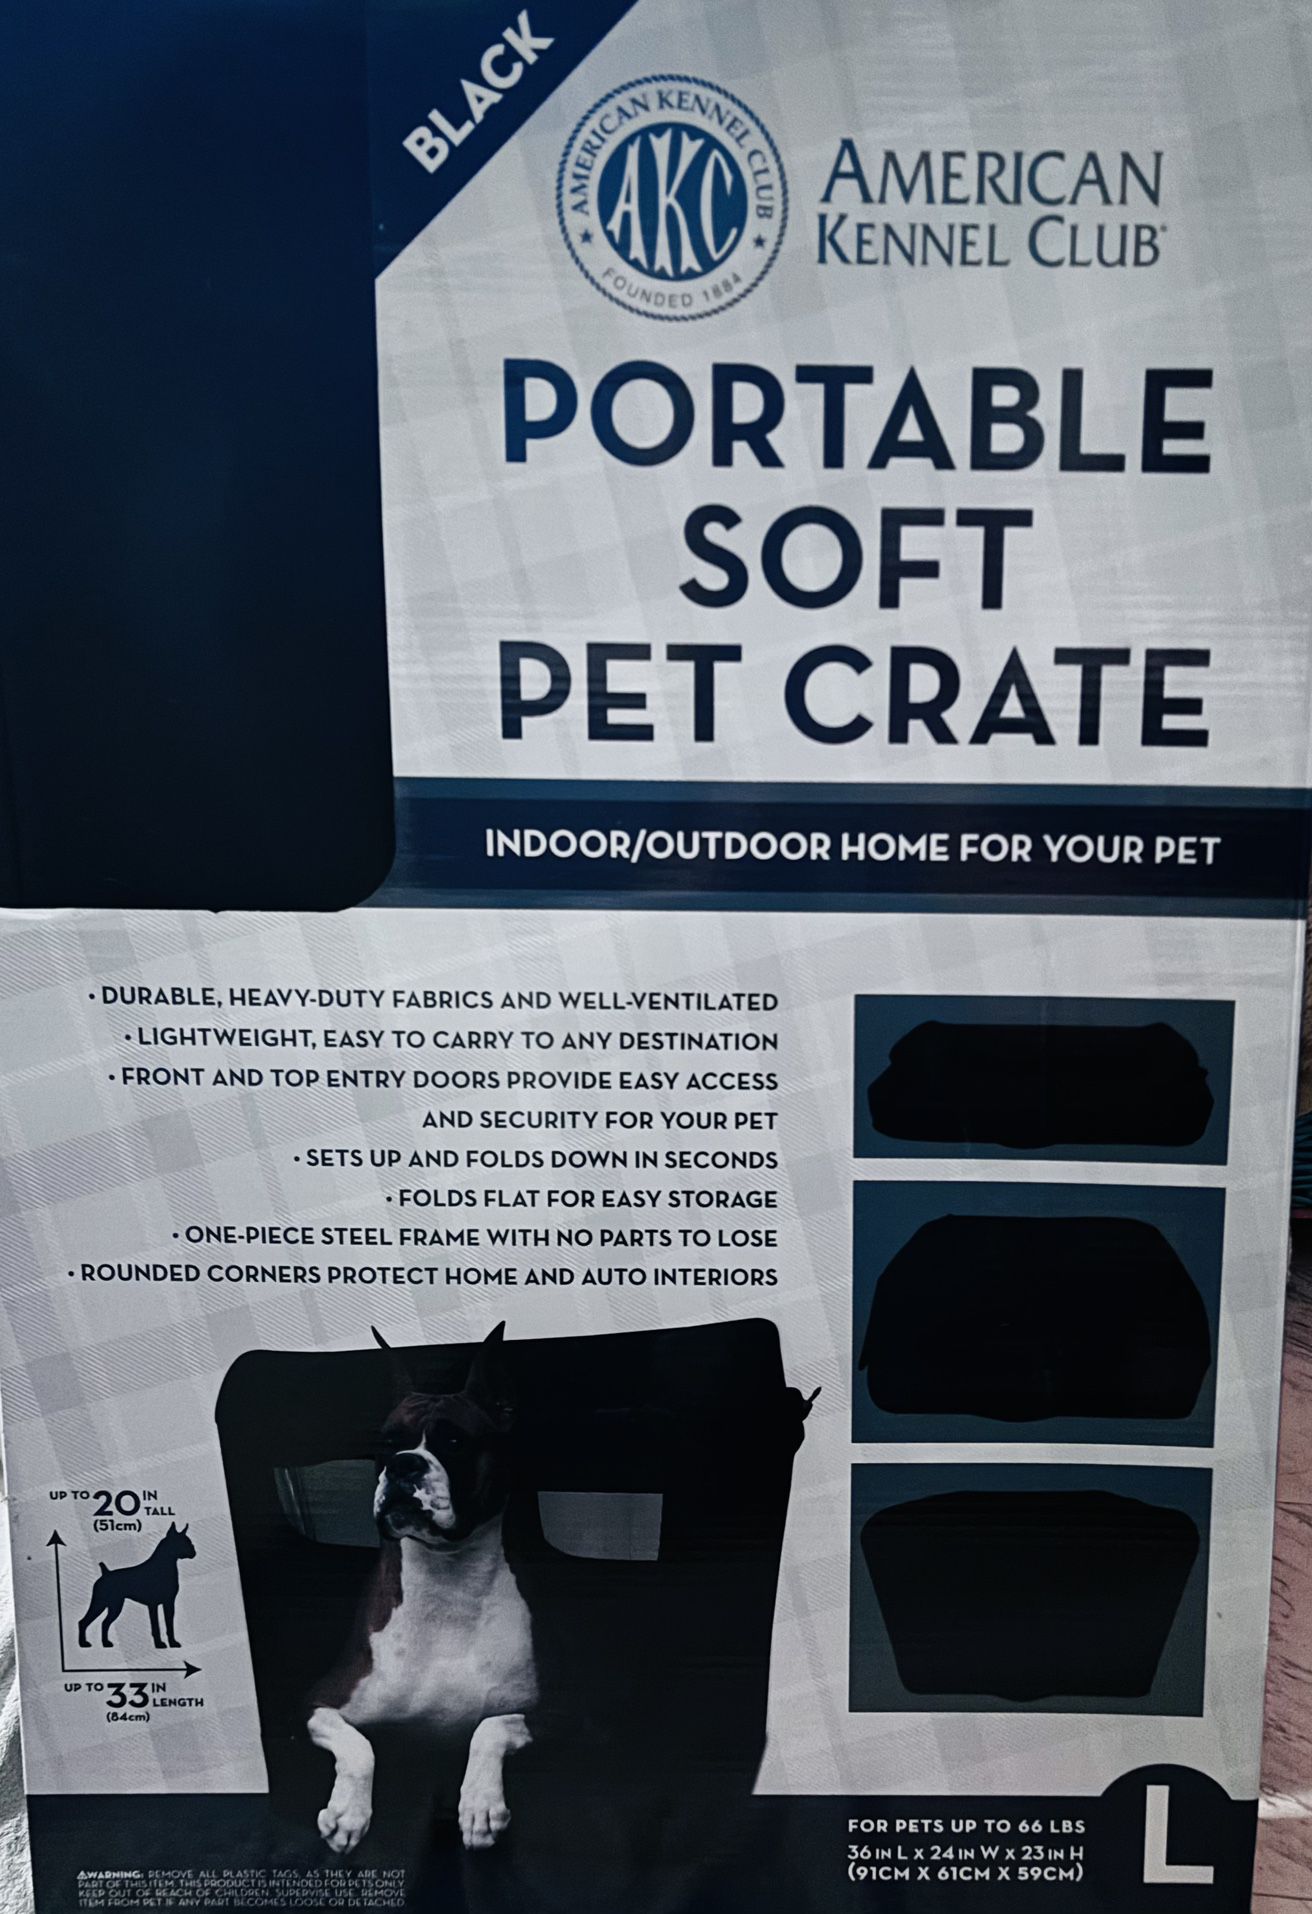 BRAND NEW -PORTABLE SOFT PET CRATE ! 